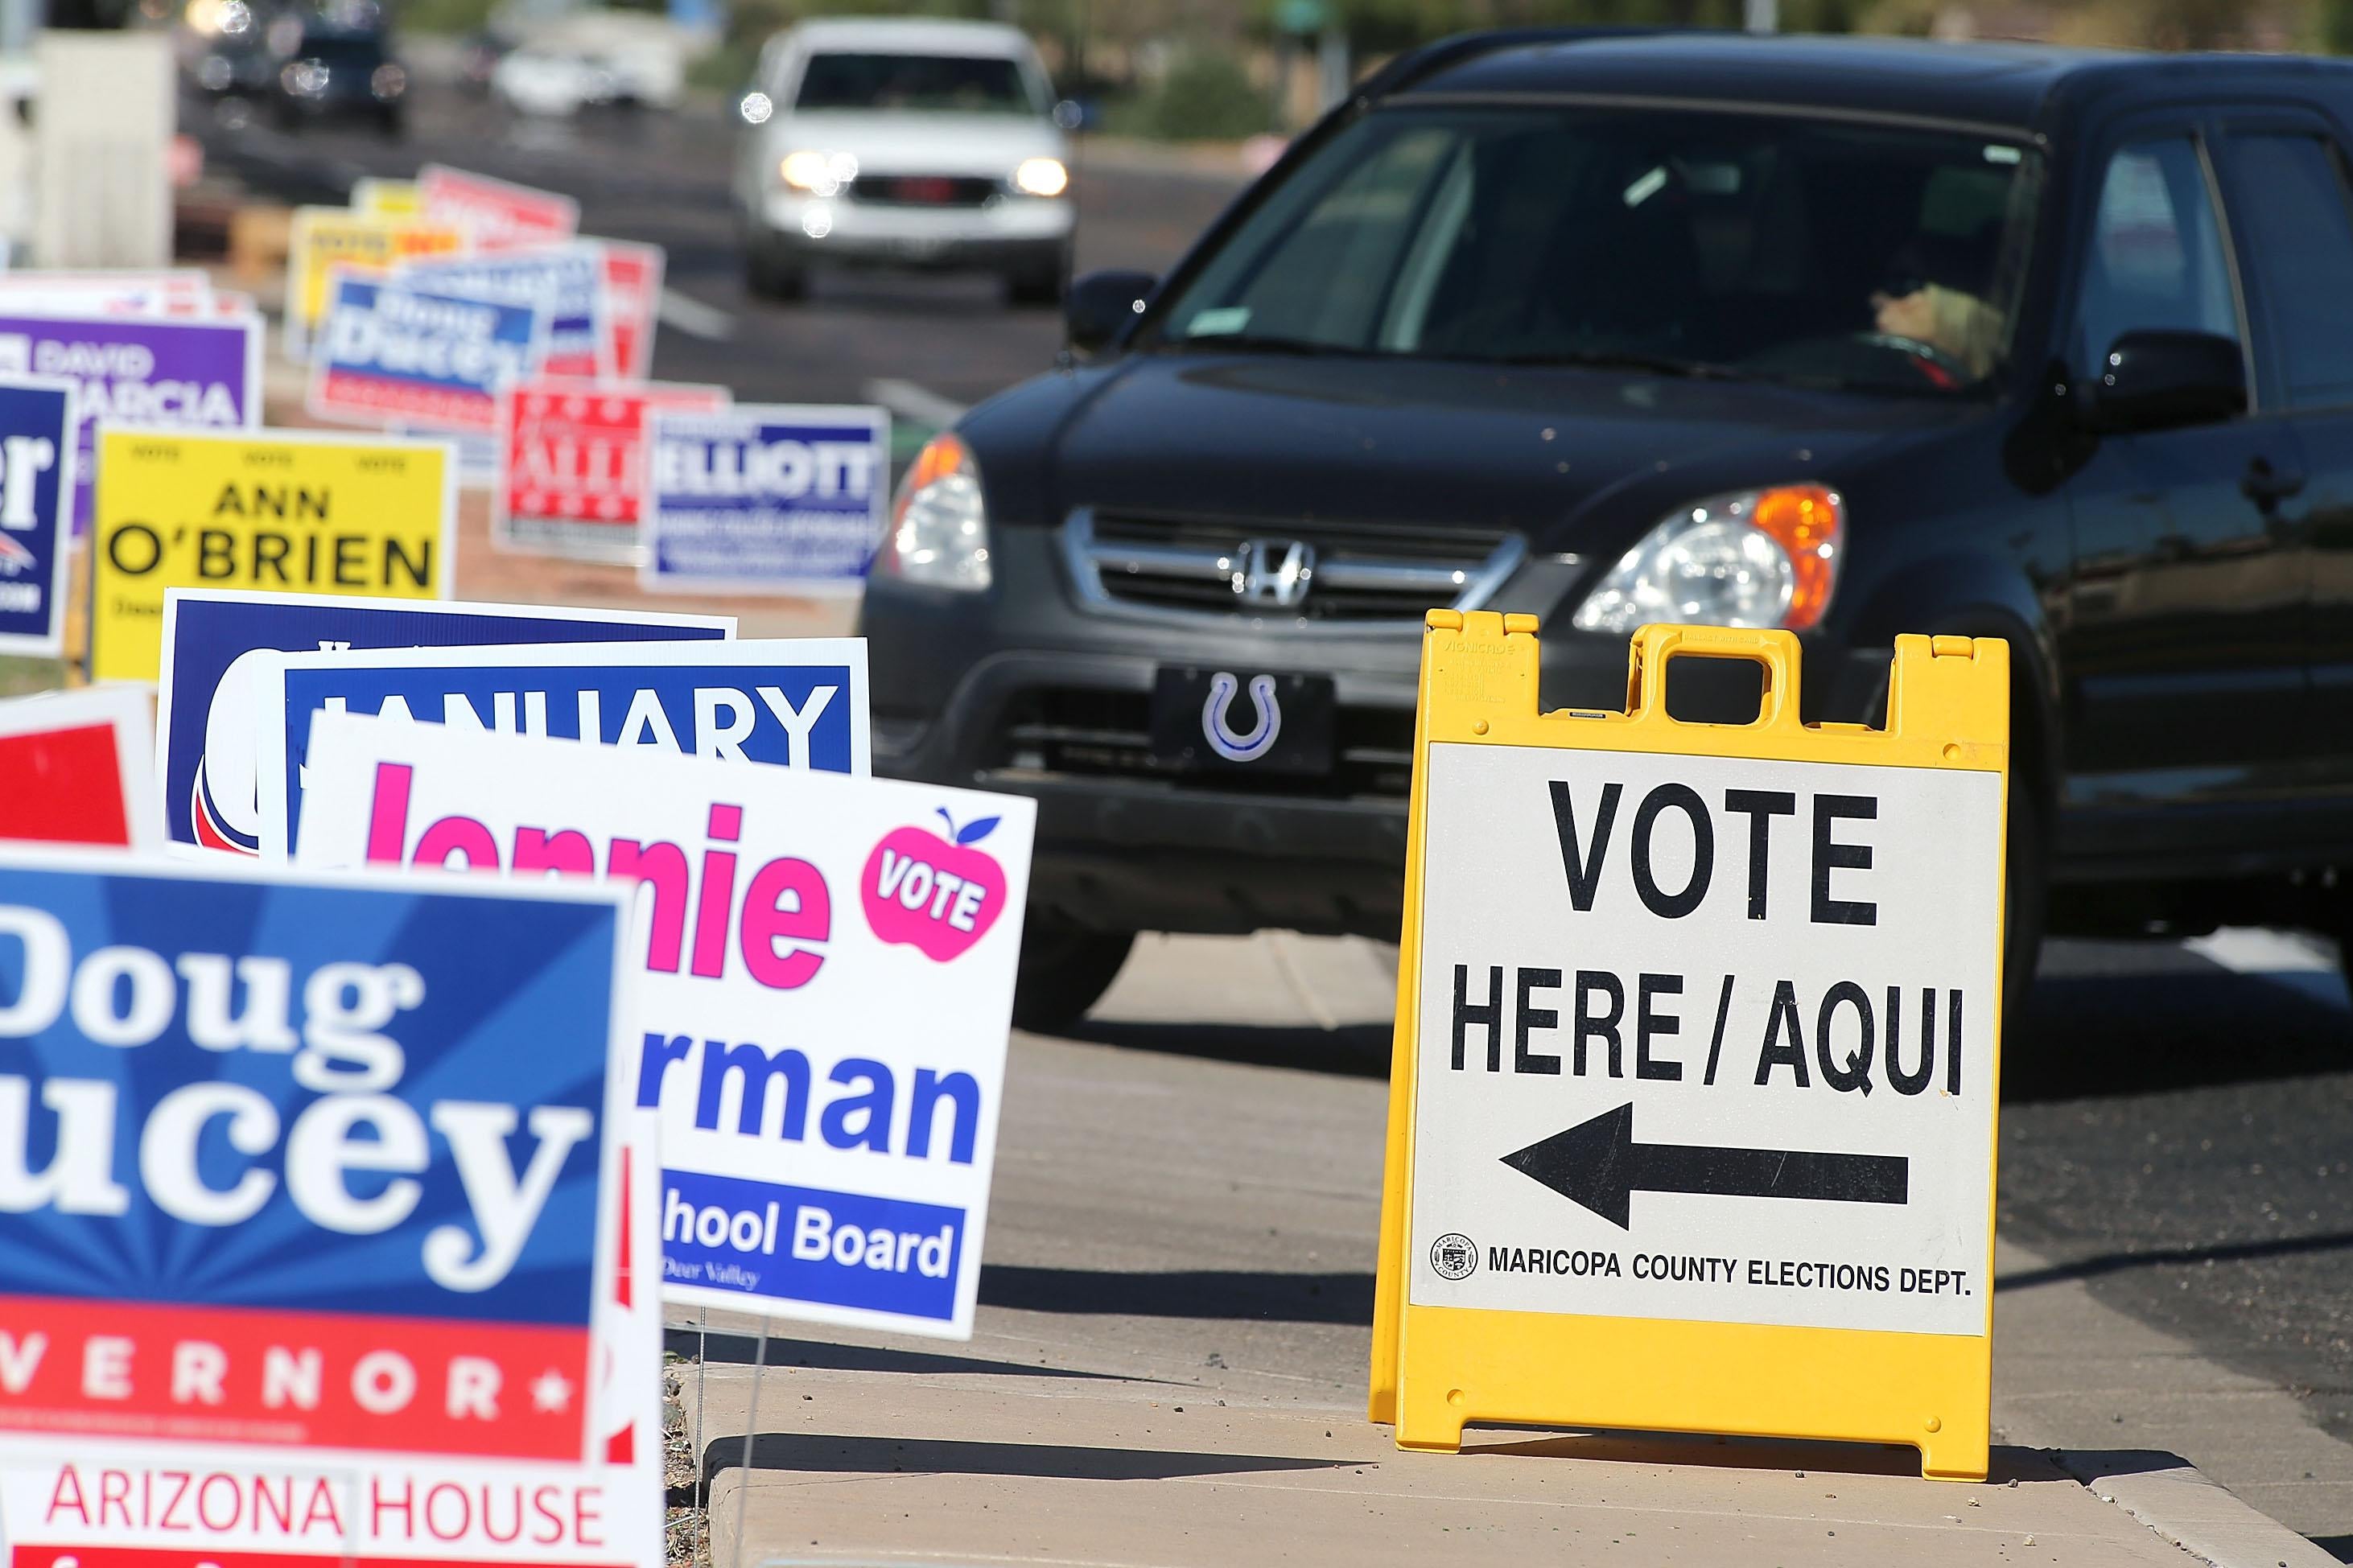 A car drives by a "VOTE HERE/AQUI" sign and a row of campaign signs for Doug Ducey and others.